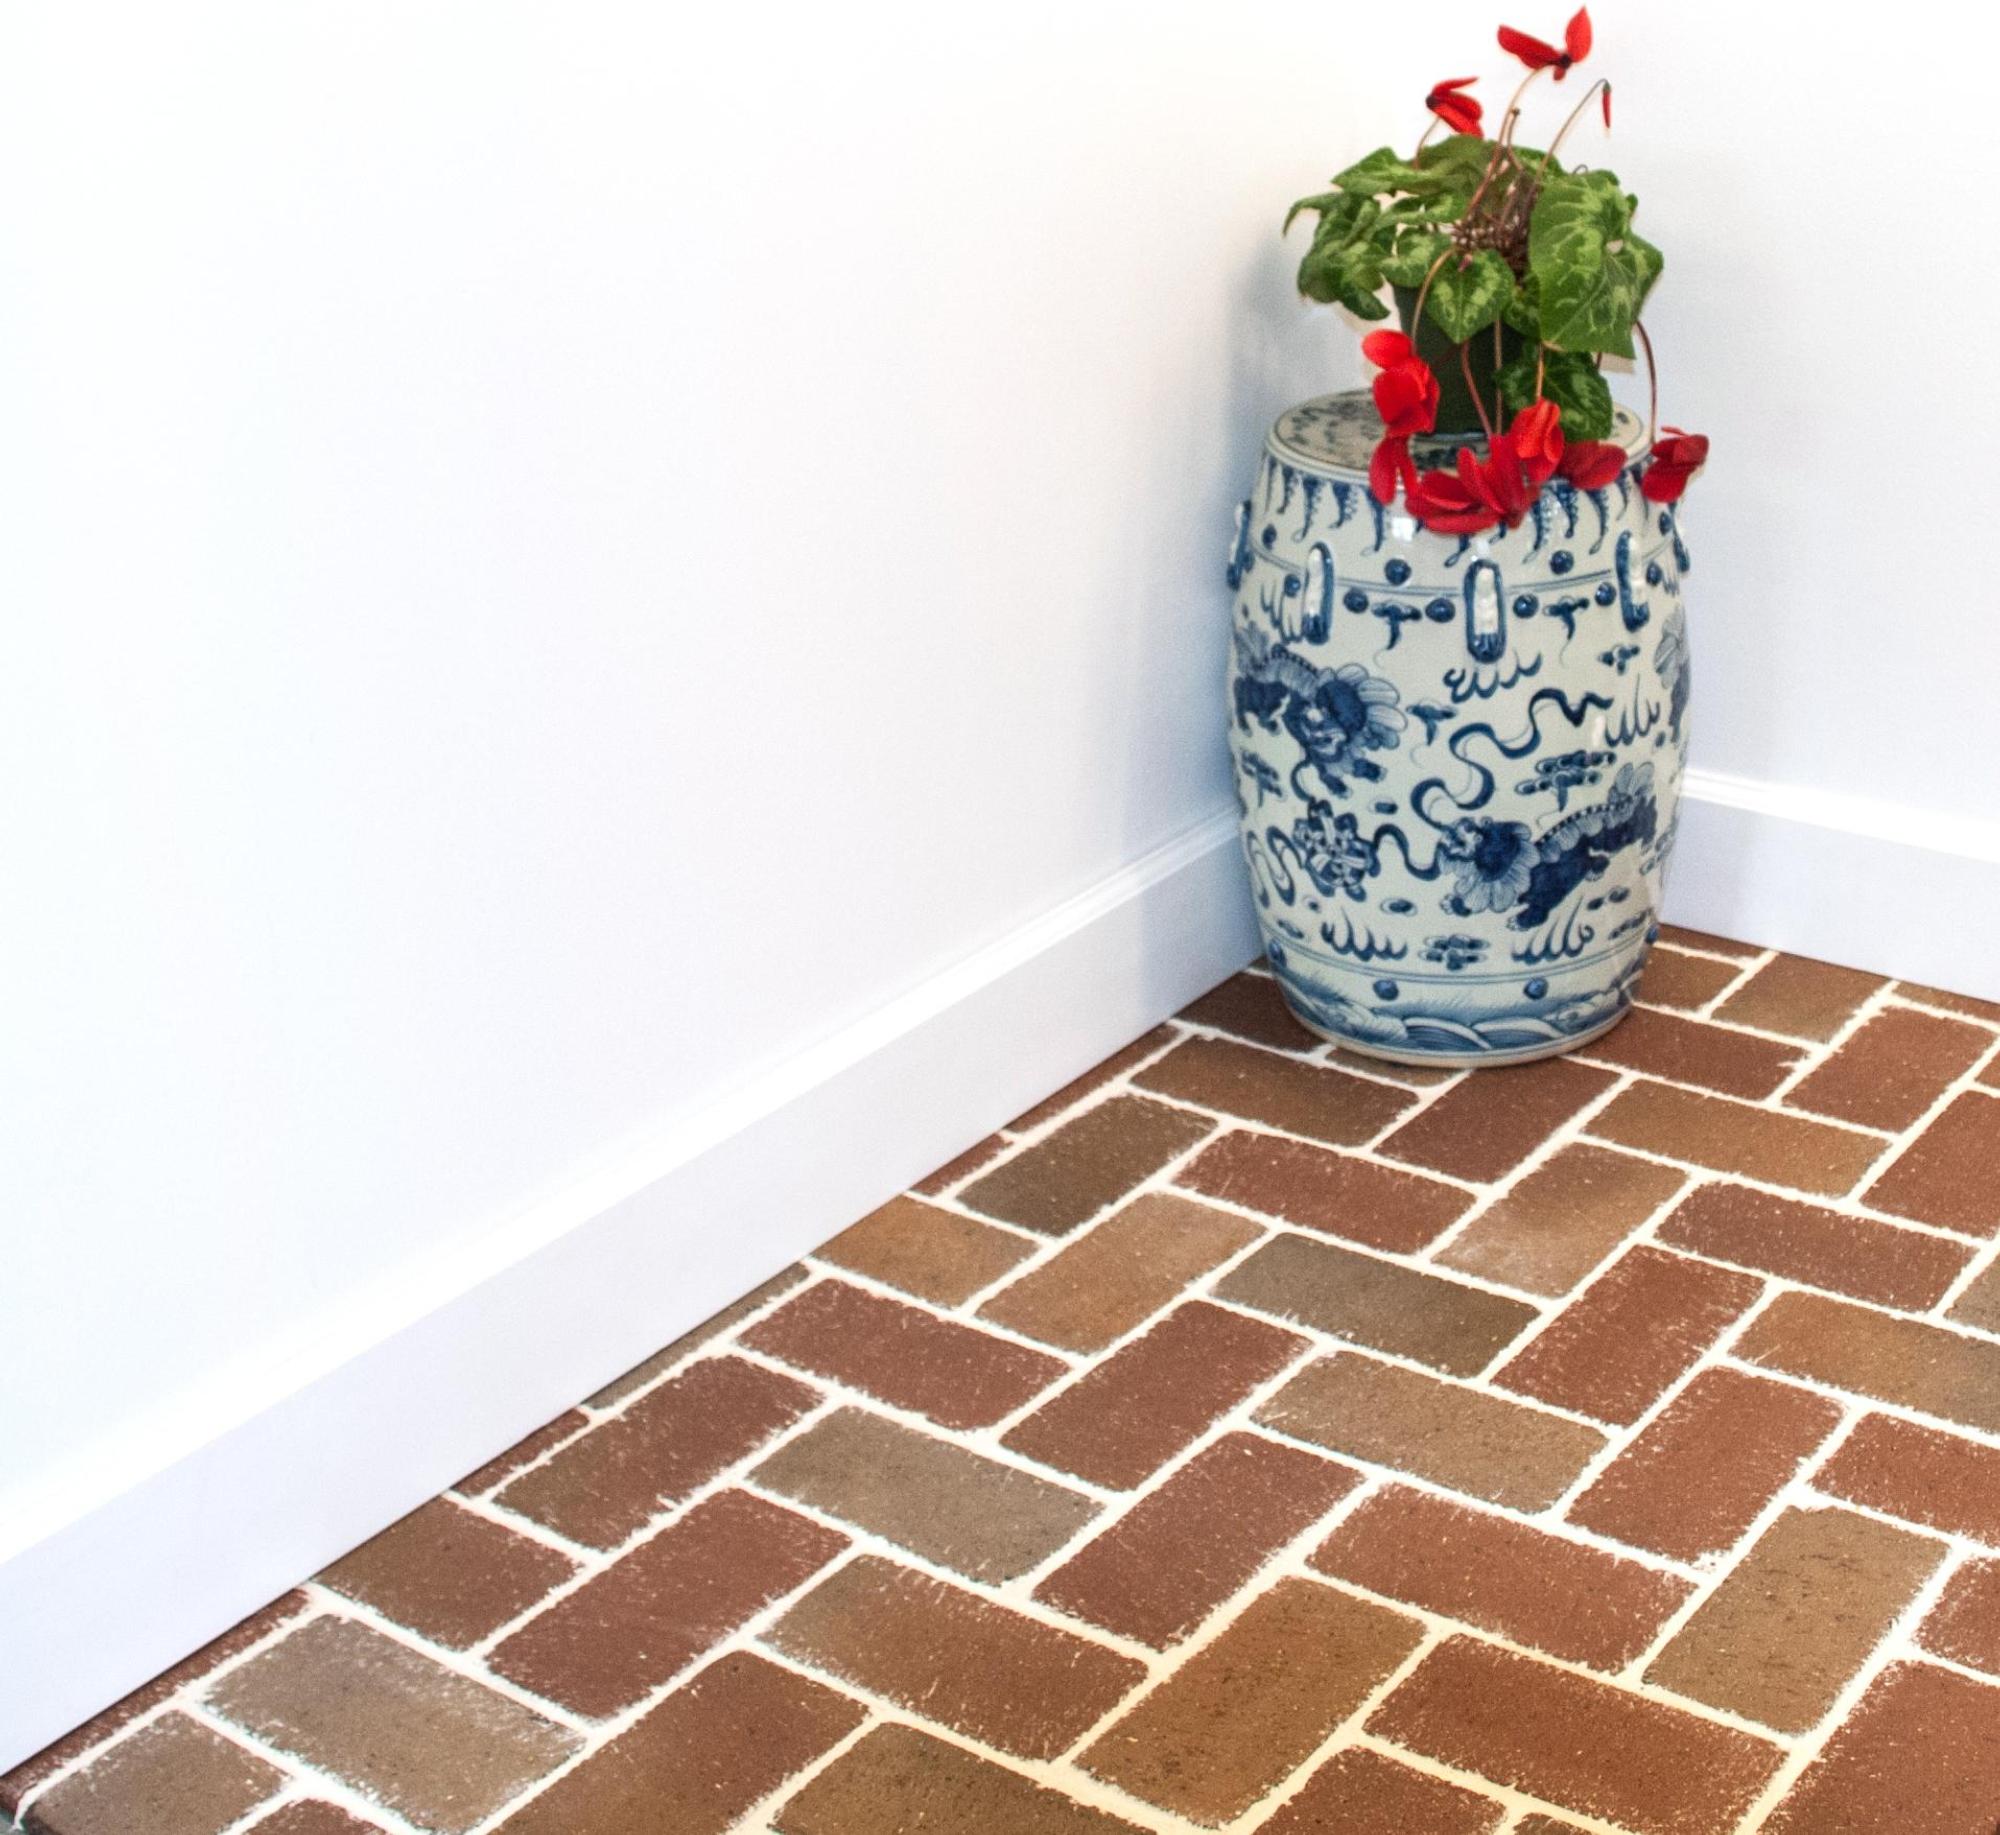 Image of a brick floor in an inside room with a decorative plant in the corner and white walls